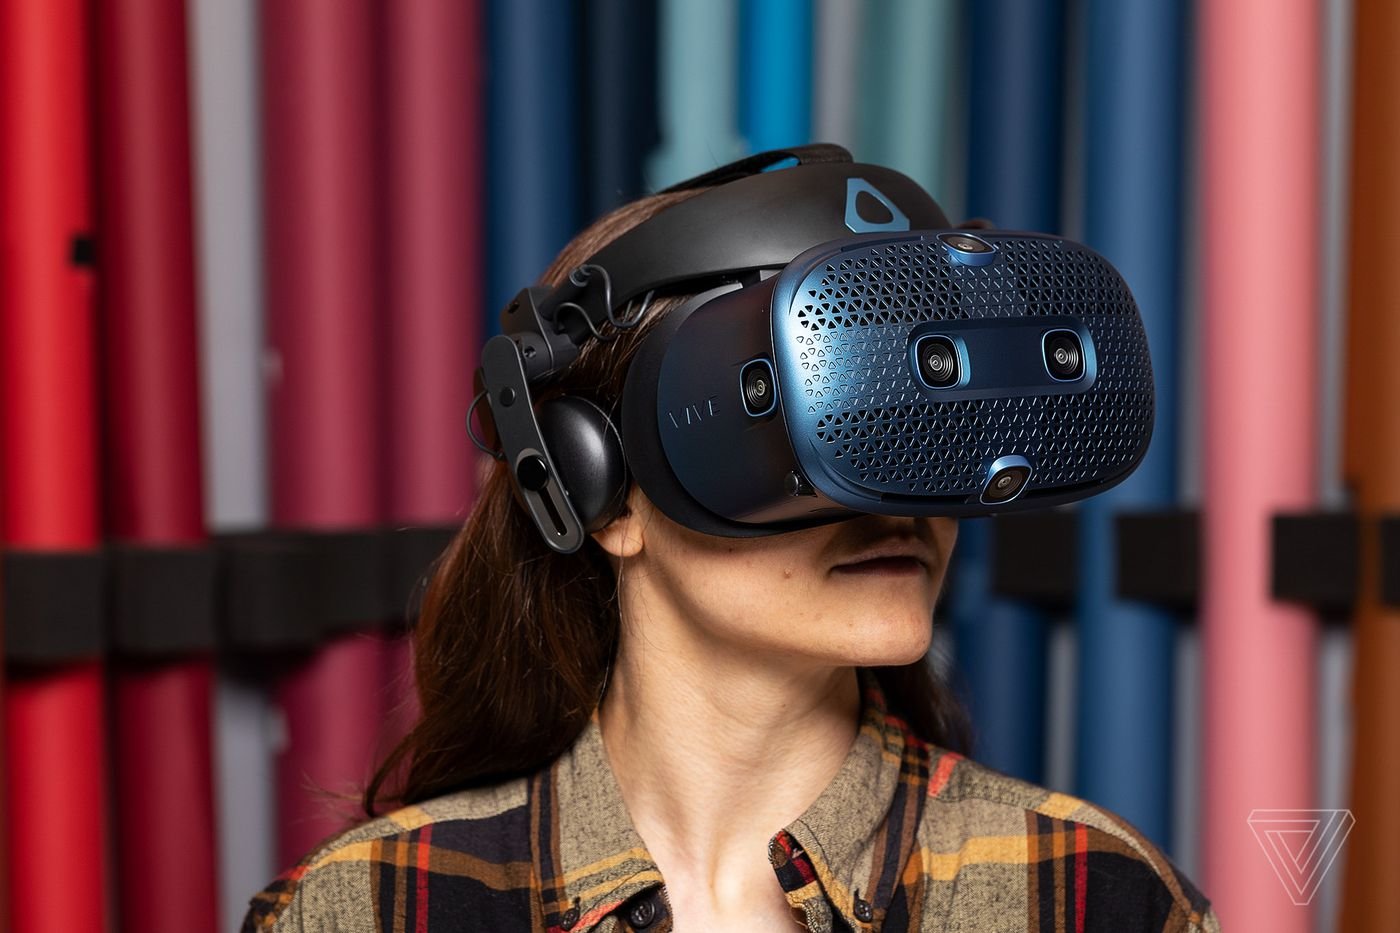 HTC to announce two new Vive VR headsets this month